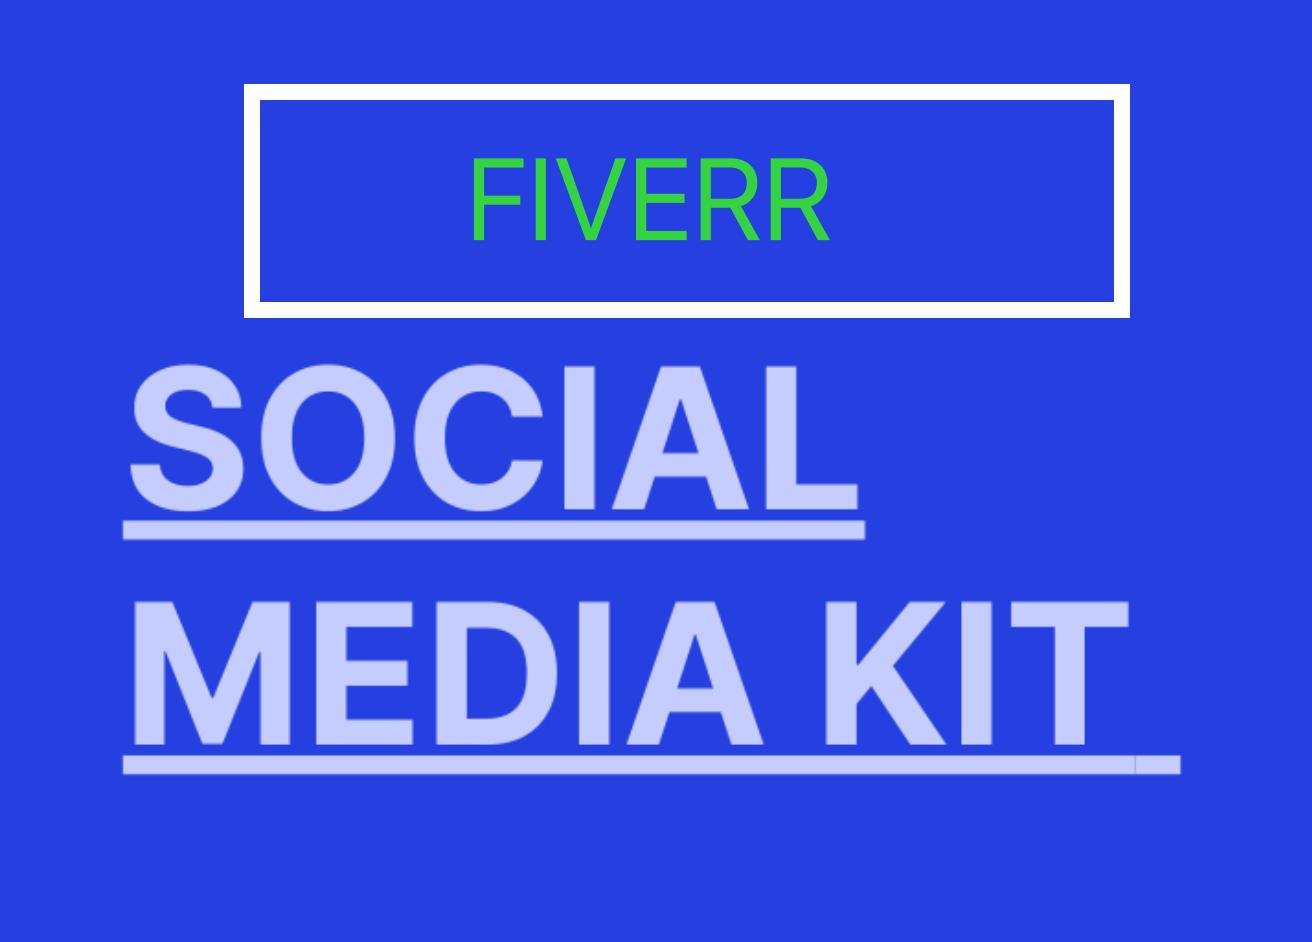 what is social media kits on fiverr